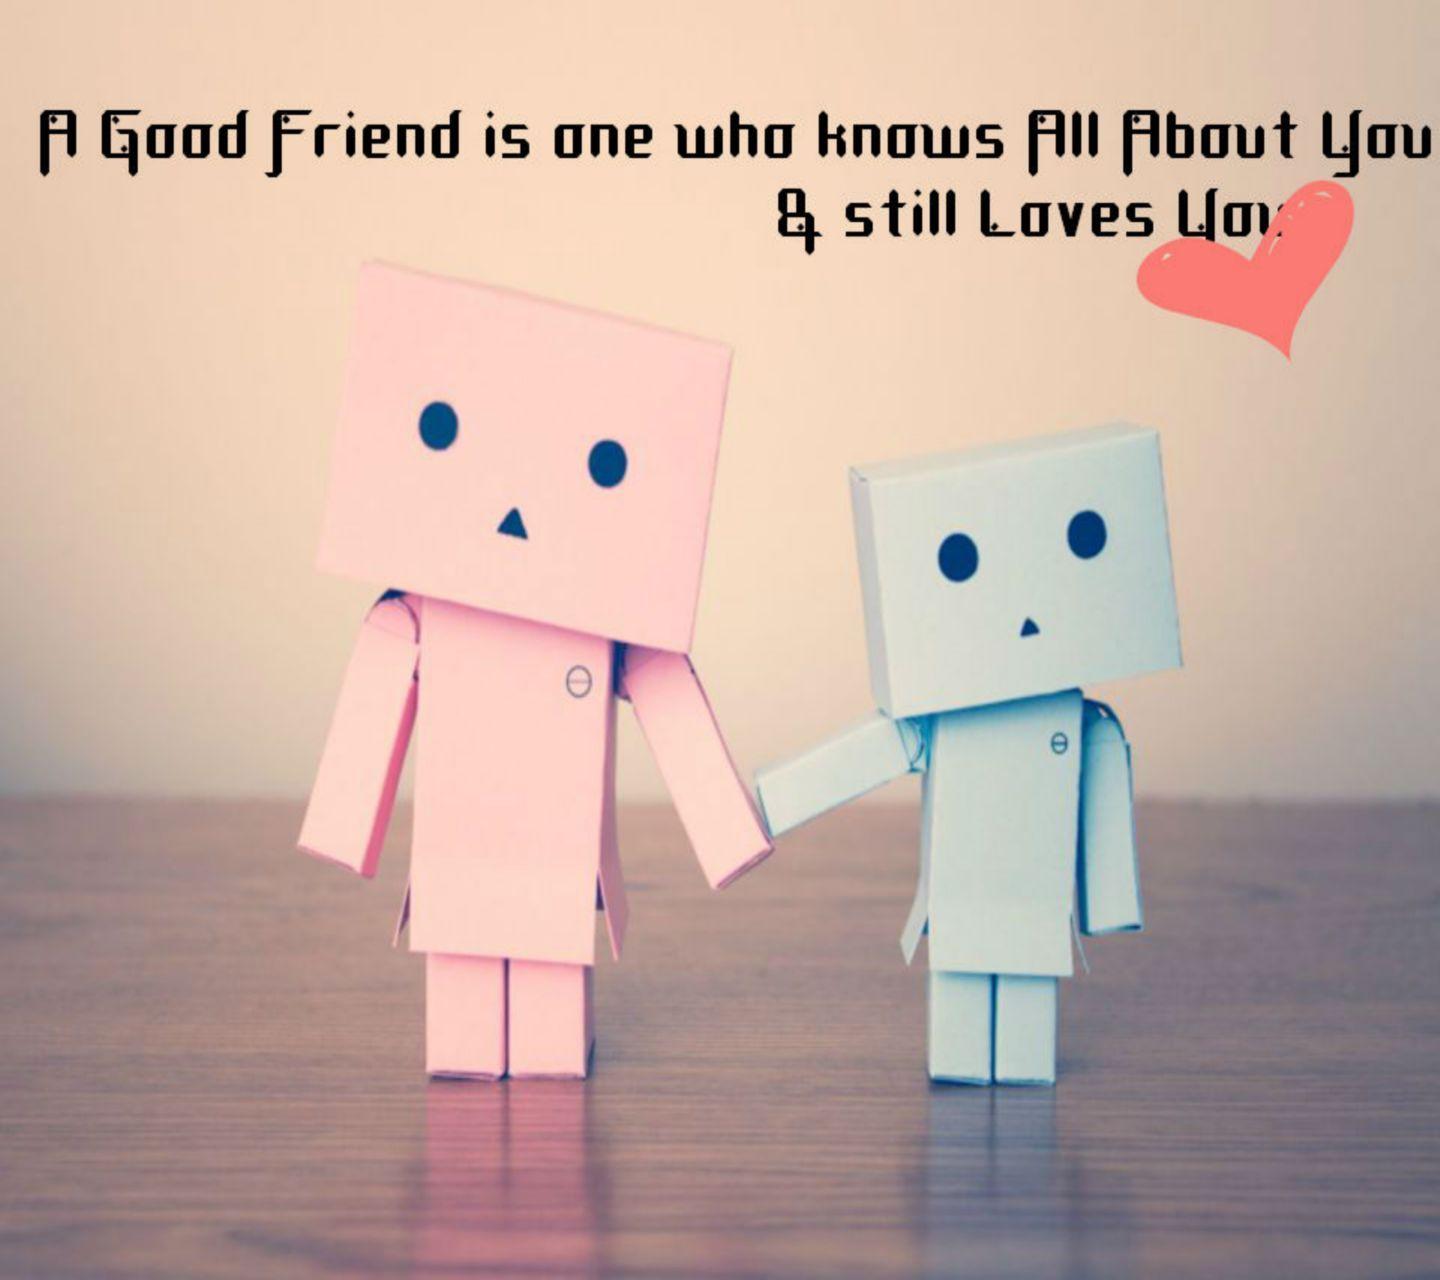 Cute Friendship Day Image with Message and Quotes for friend, Family